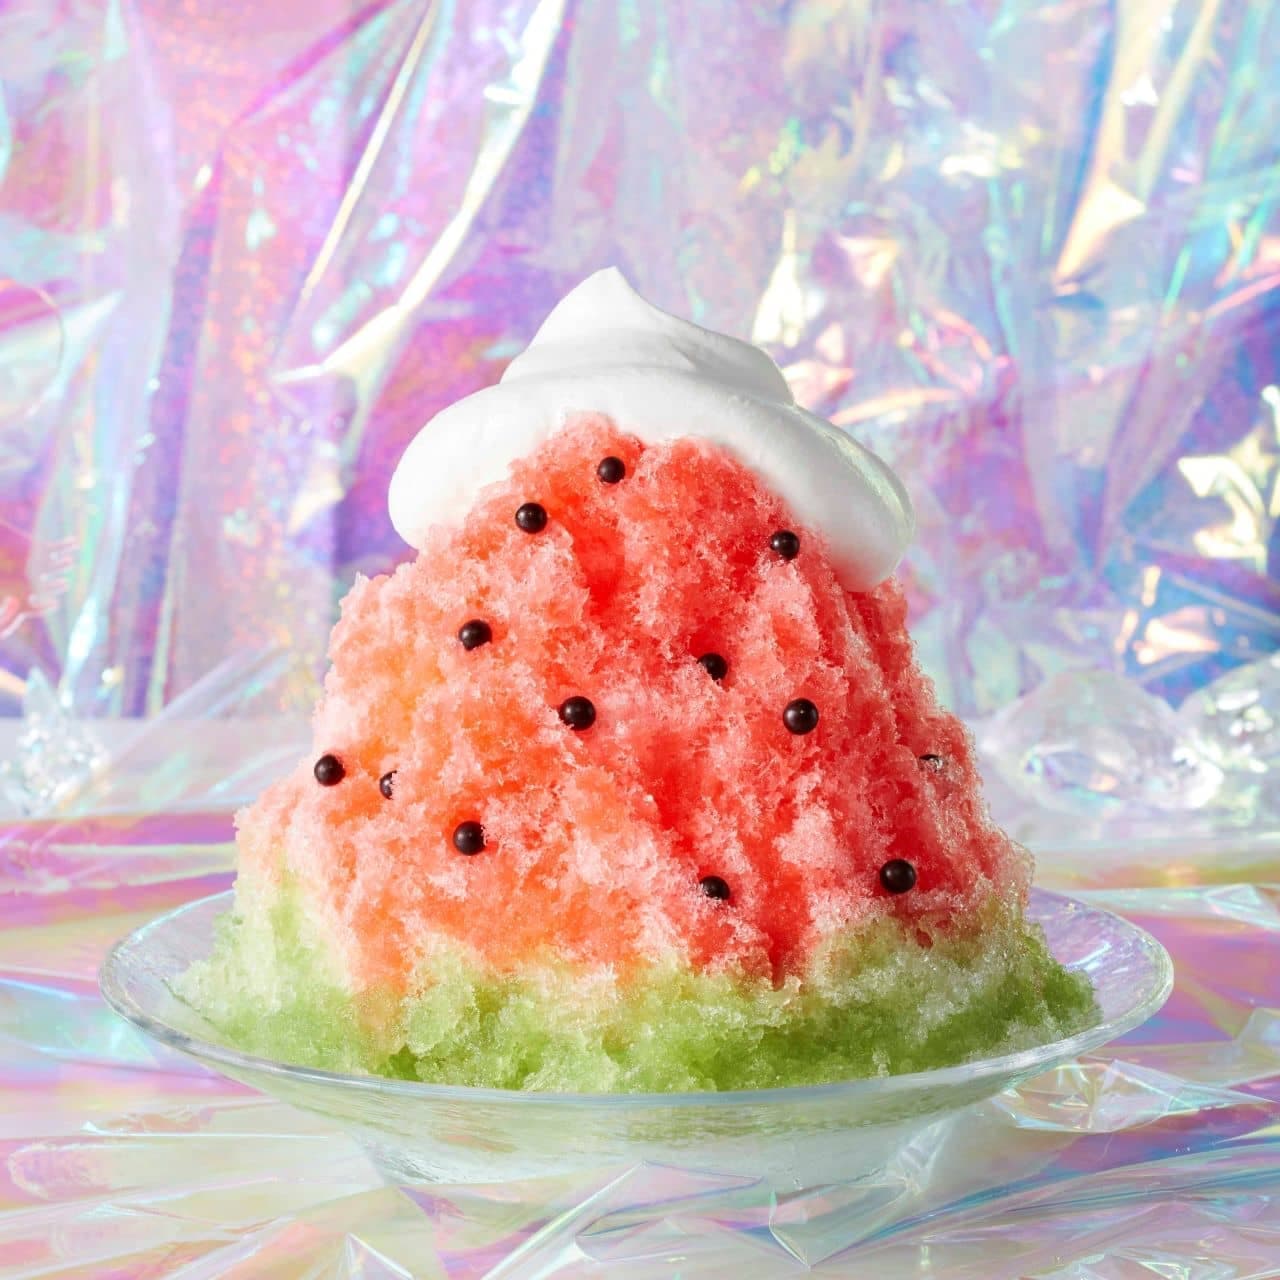 Coco's "Watermelon Fluffy Shaved Ice"